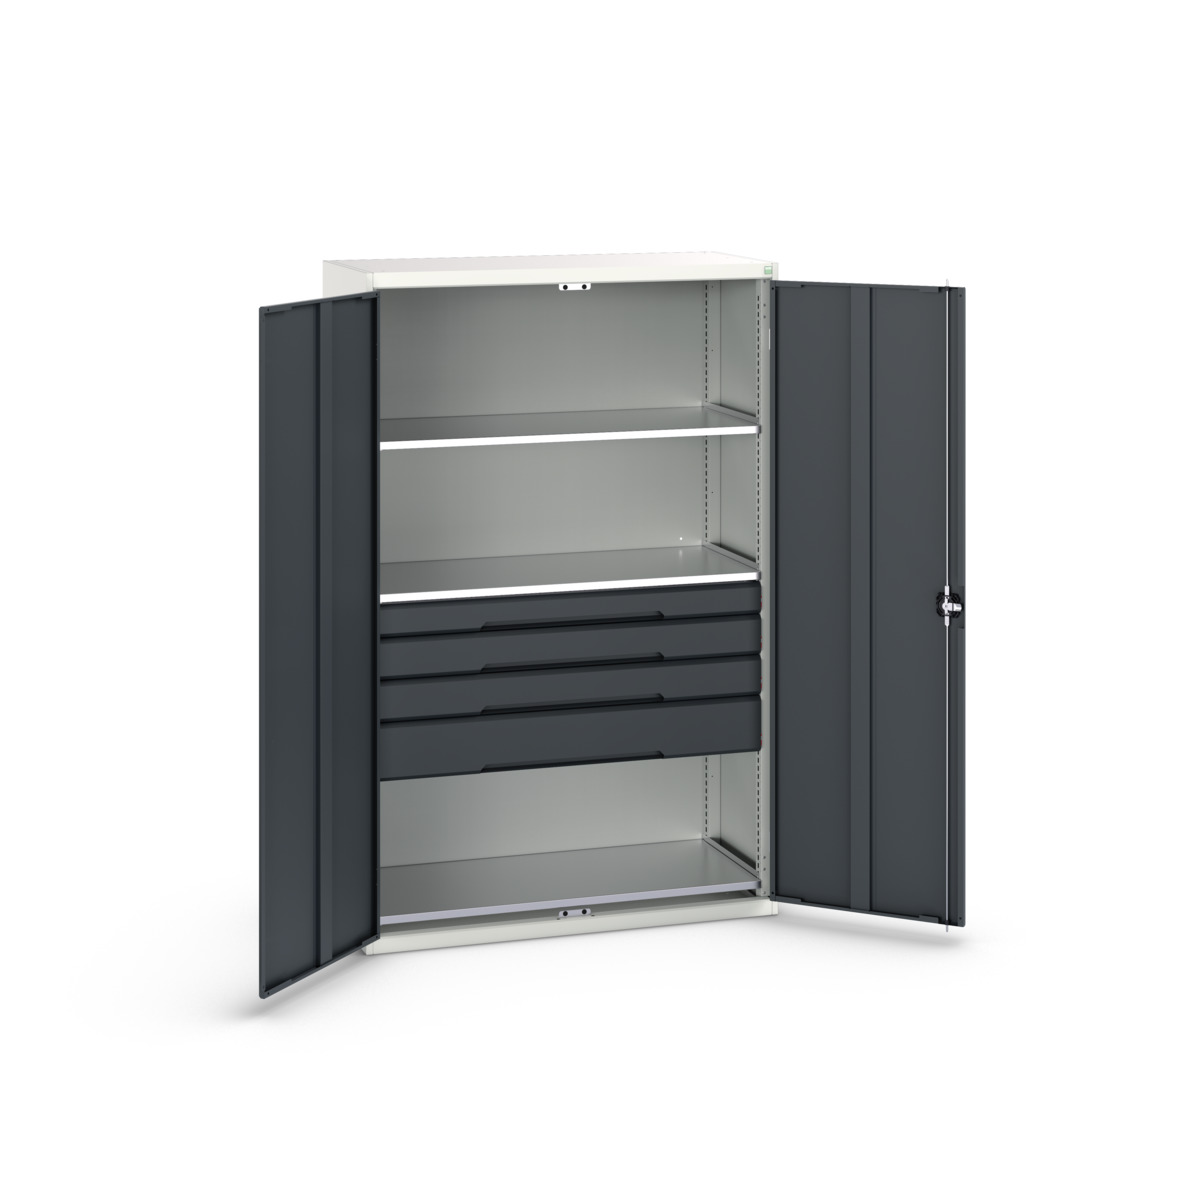 16926656. - verso kitted cupboard